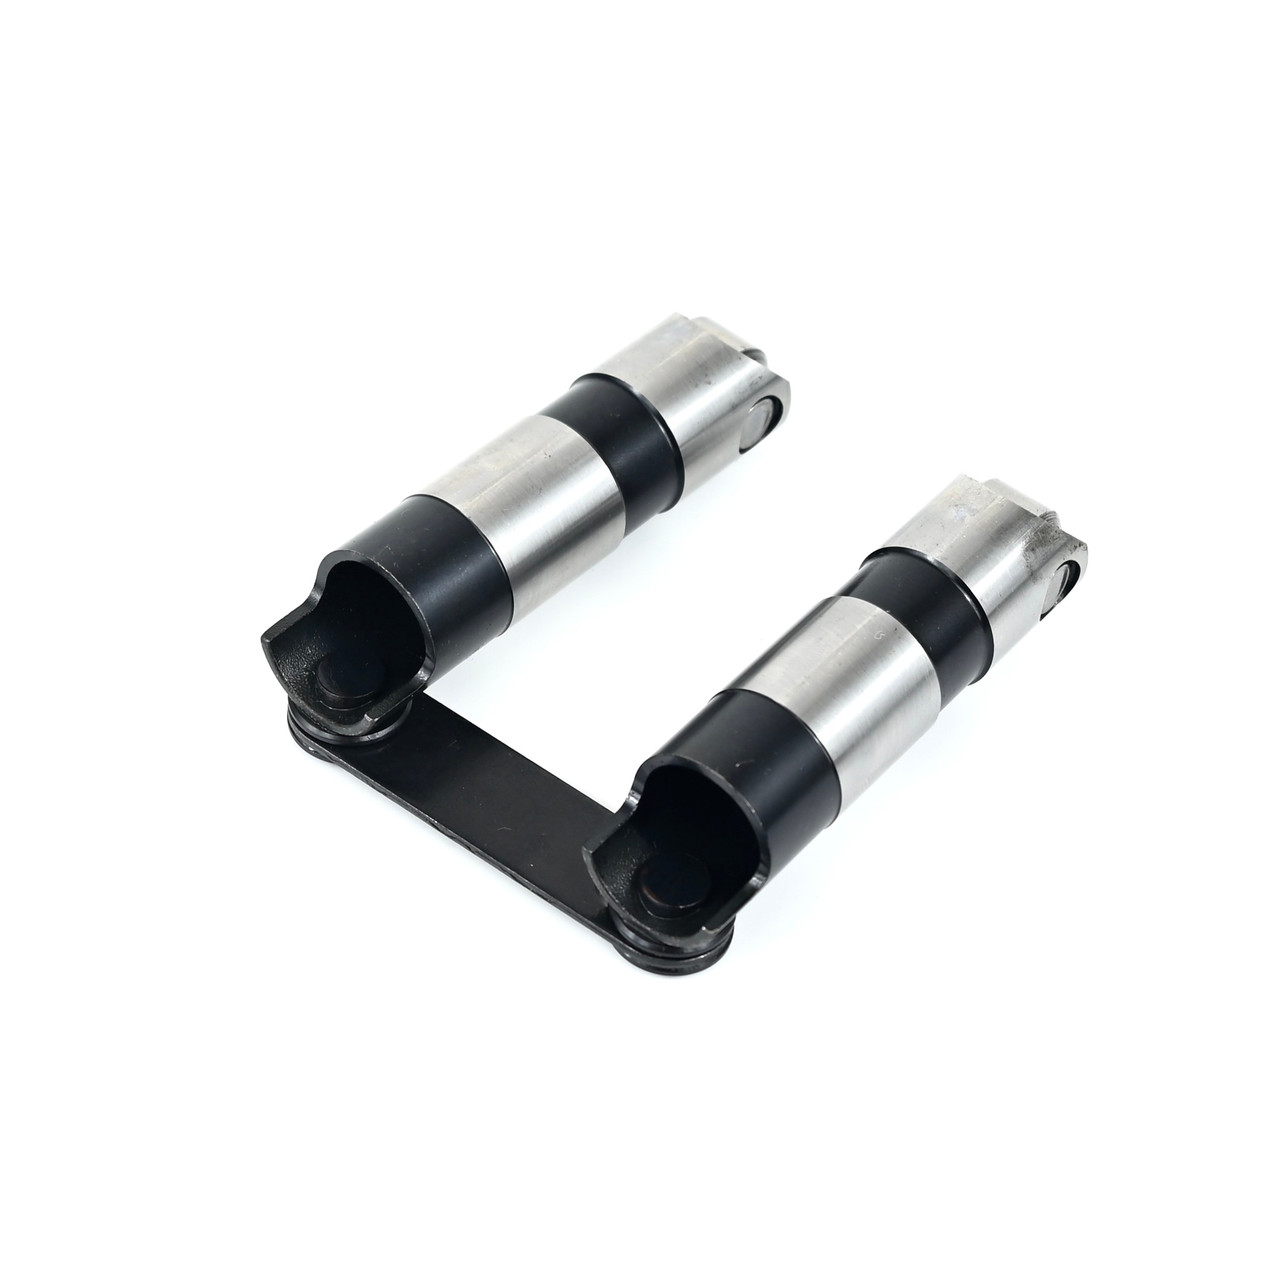 Johnson 2116LSR Link-Bar Hydraulic Lifters for LS 4.8 5.3 5.7 6.0 6.2 7.0 Slow Leakdown Reduced Travel